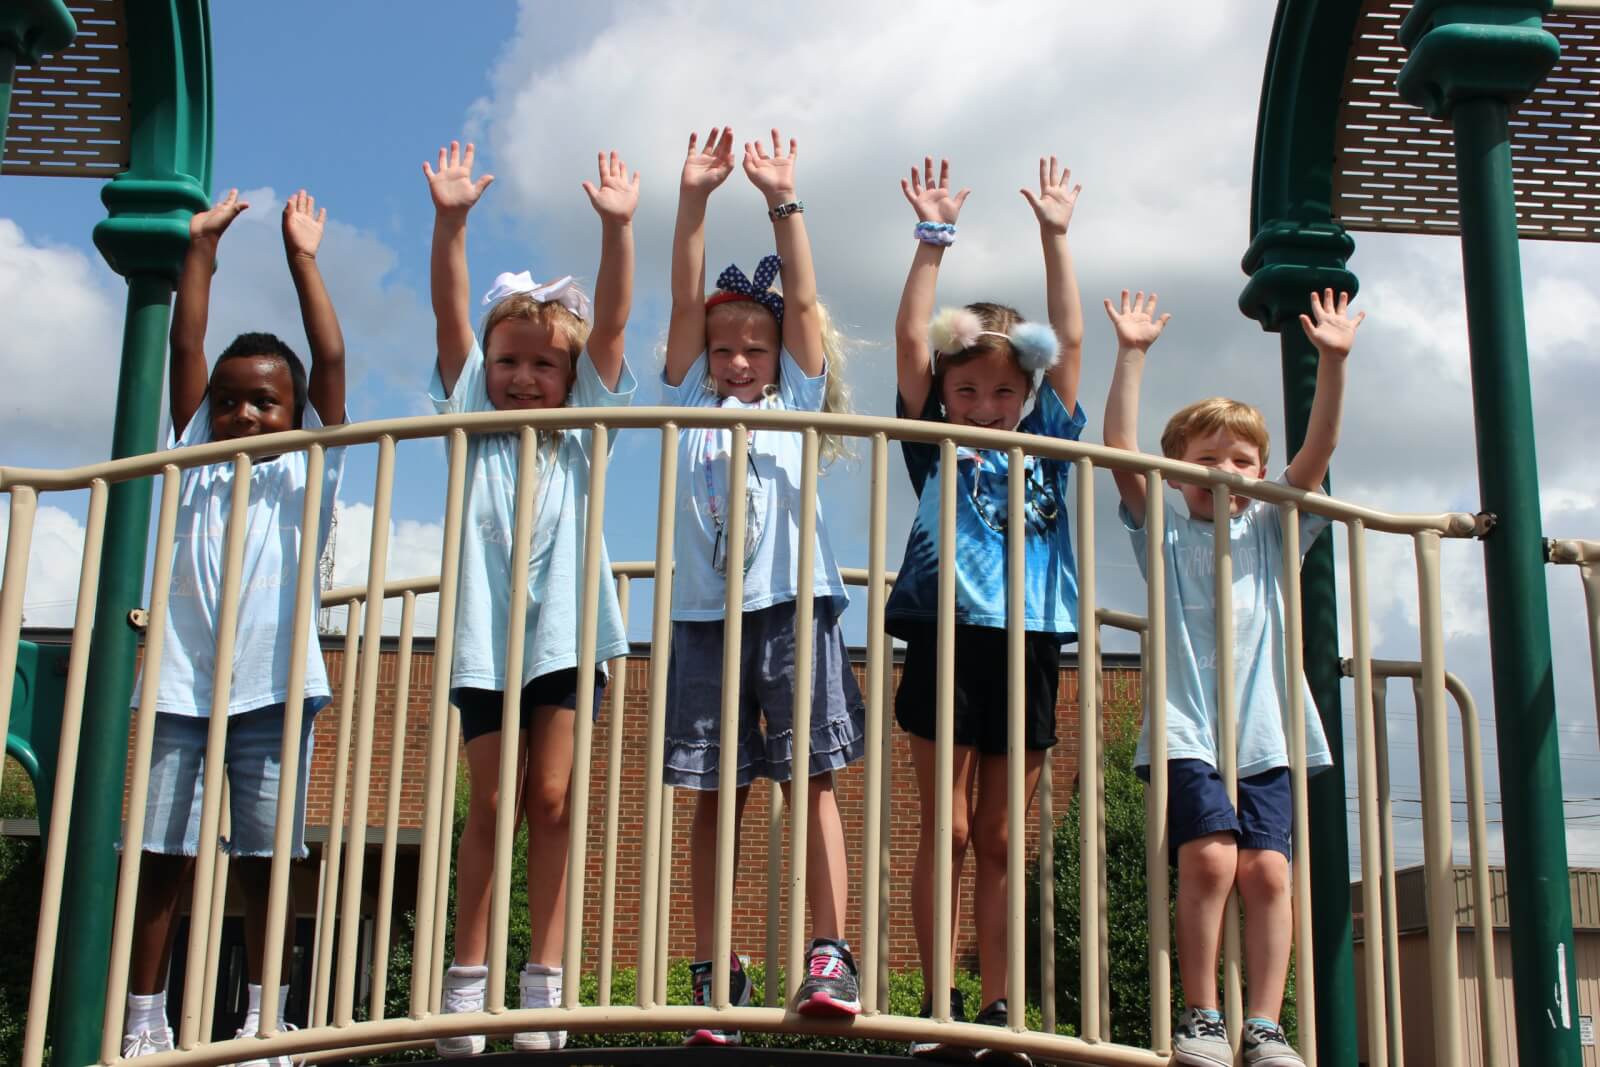 Camp Timberwolf campers at St. Francis of Assisi Catholic School